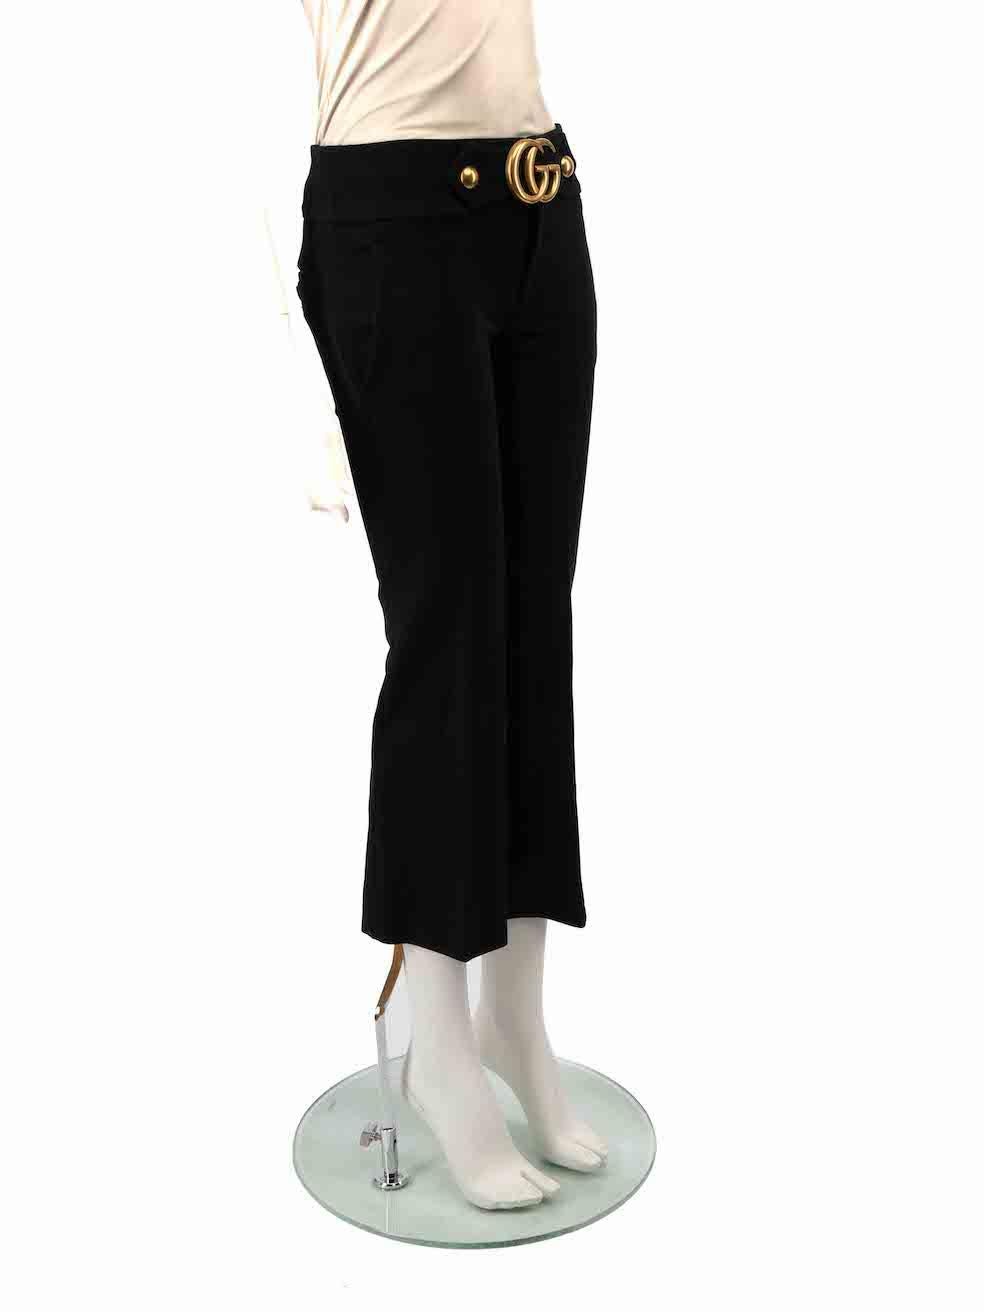 CONDITION is Very good. Minimal wear to trousers is evident. Minimal wear to metal buckle with some slight tarnishing on this used Gucci designer resale item.
 
 
 
 Details
 
 
 Model: Doppia
 
 Black
 
 Viscose
 
 Slim fit trousers
 
 Low rise
 
